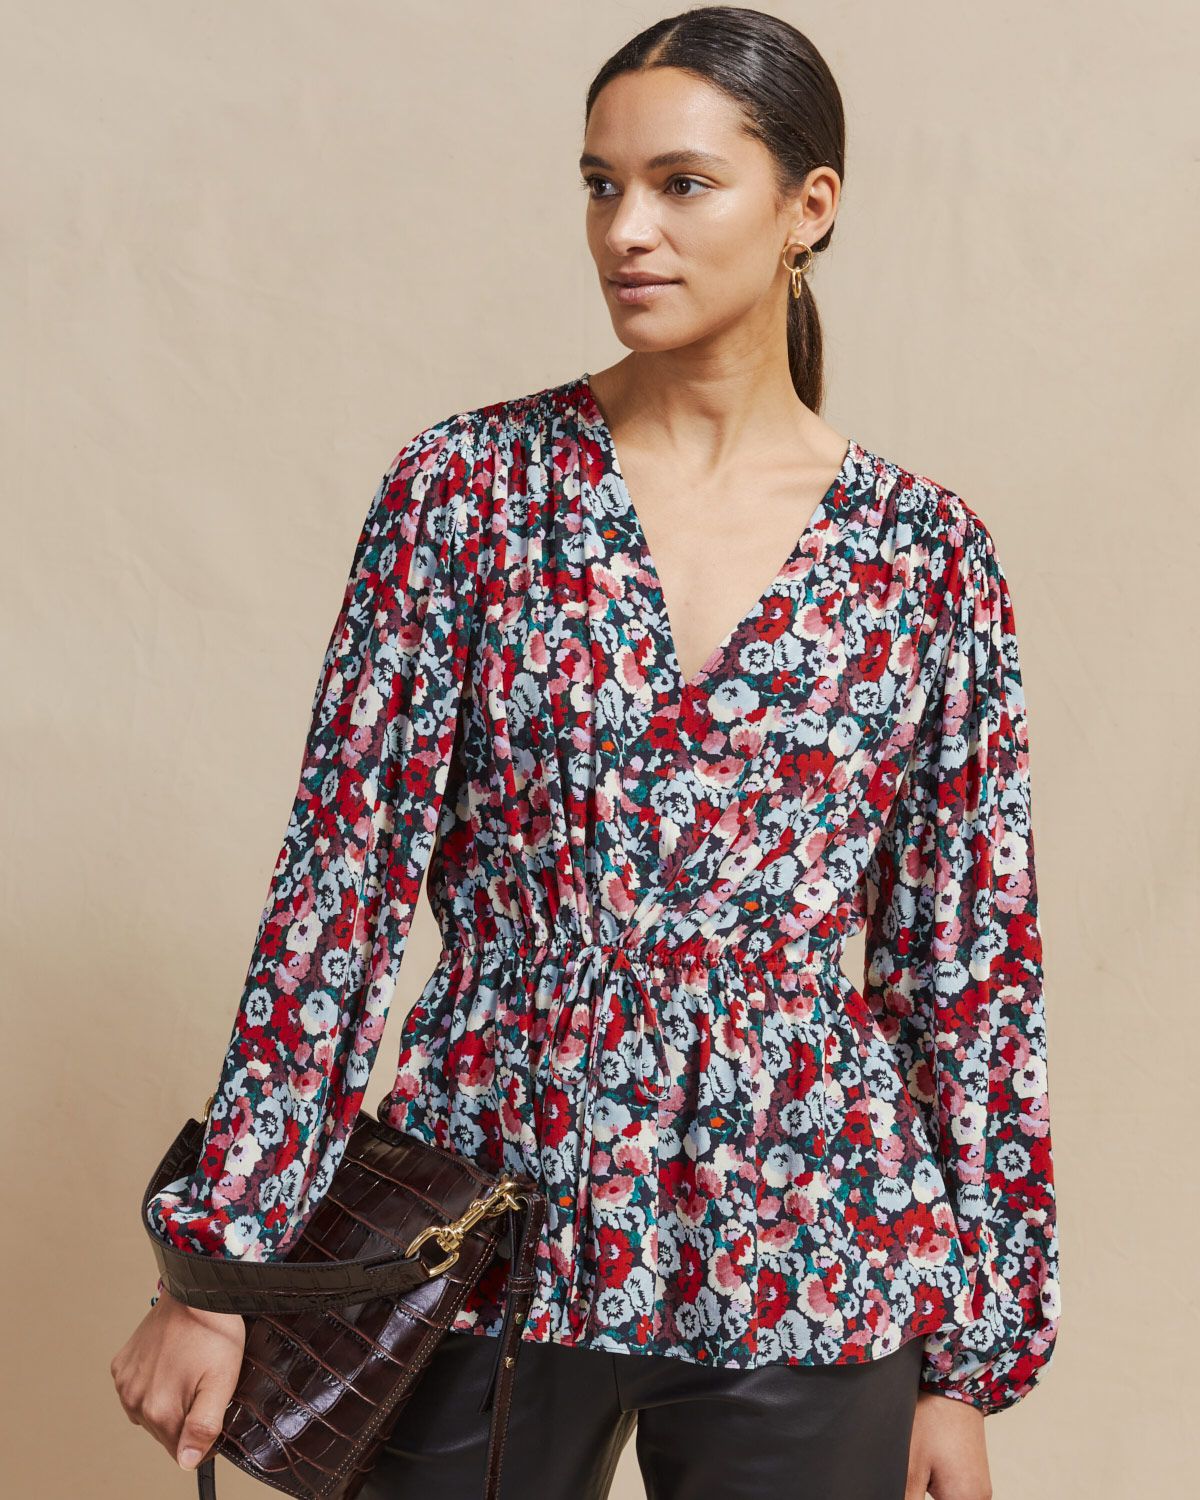 Tapestry Floral printed top with gathered waist and sleeves. The adjustable drawsting belt allows for a versitle look and flattering fit.